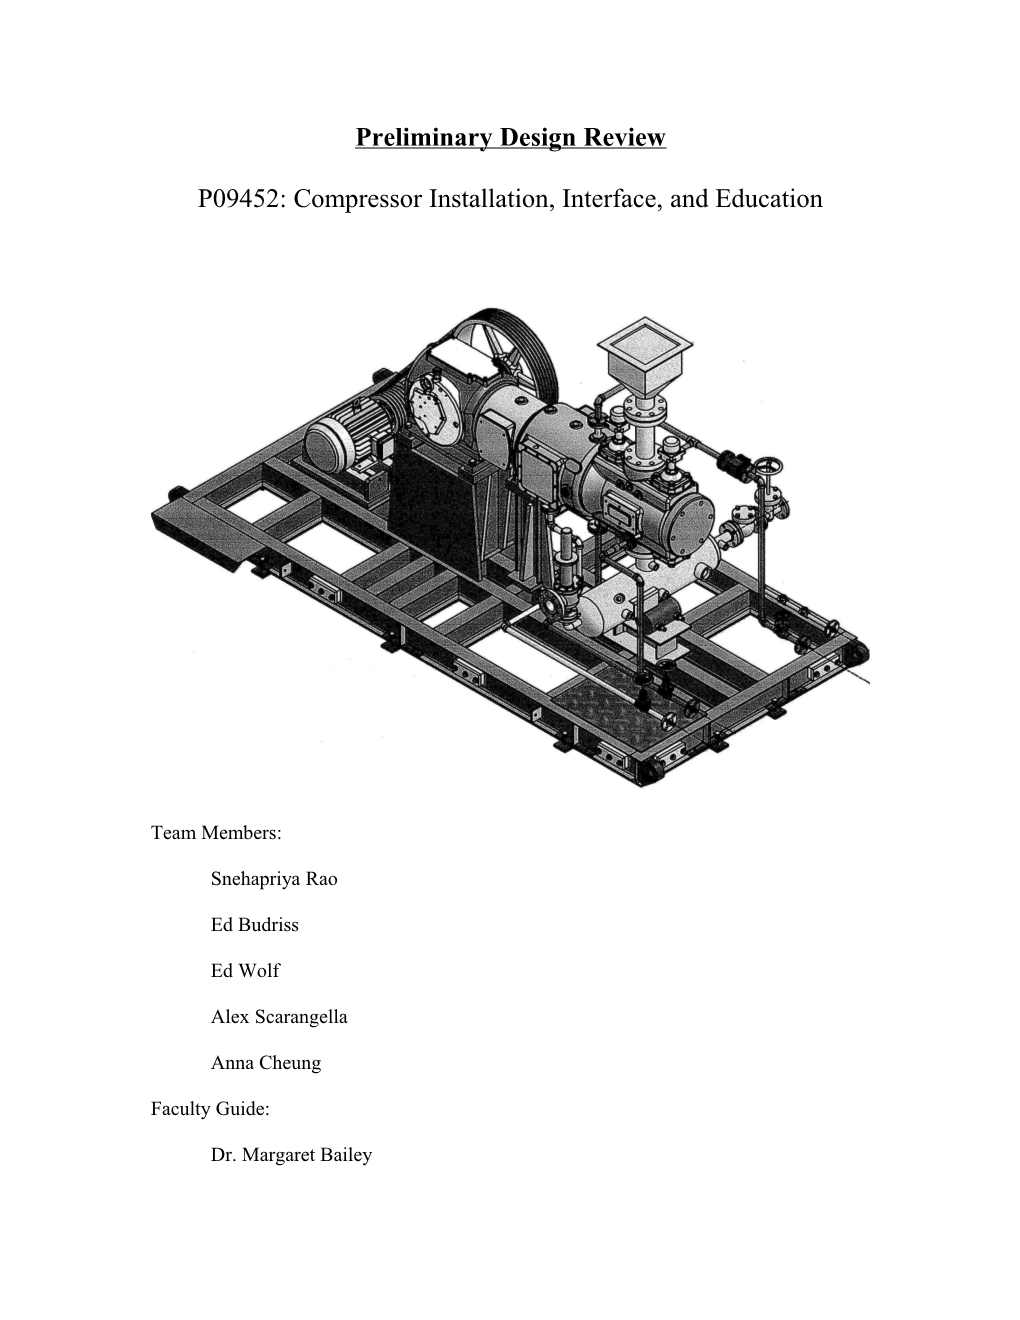 P09452:Compressor Installation, Interface and Education